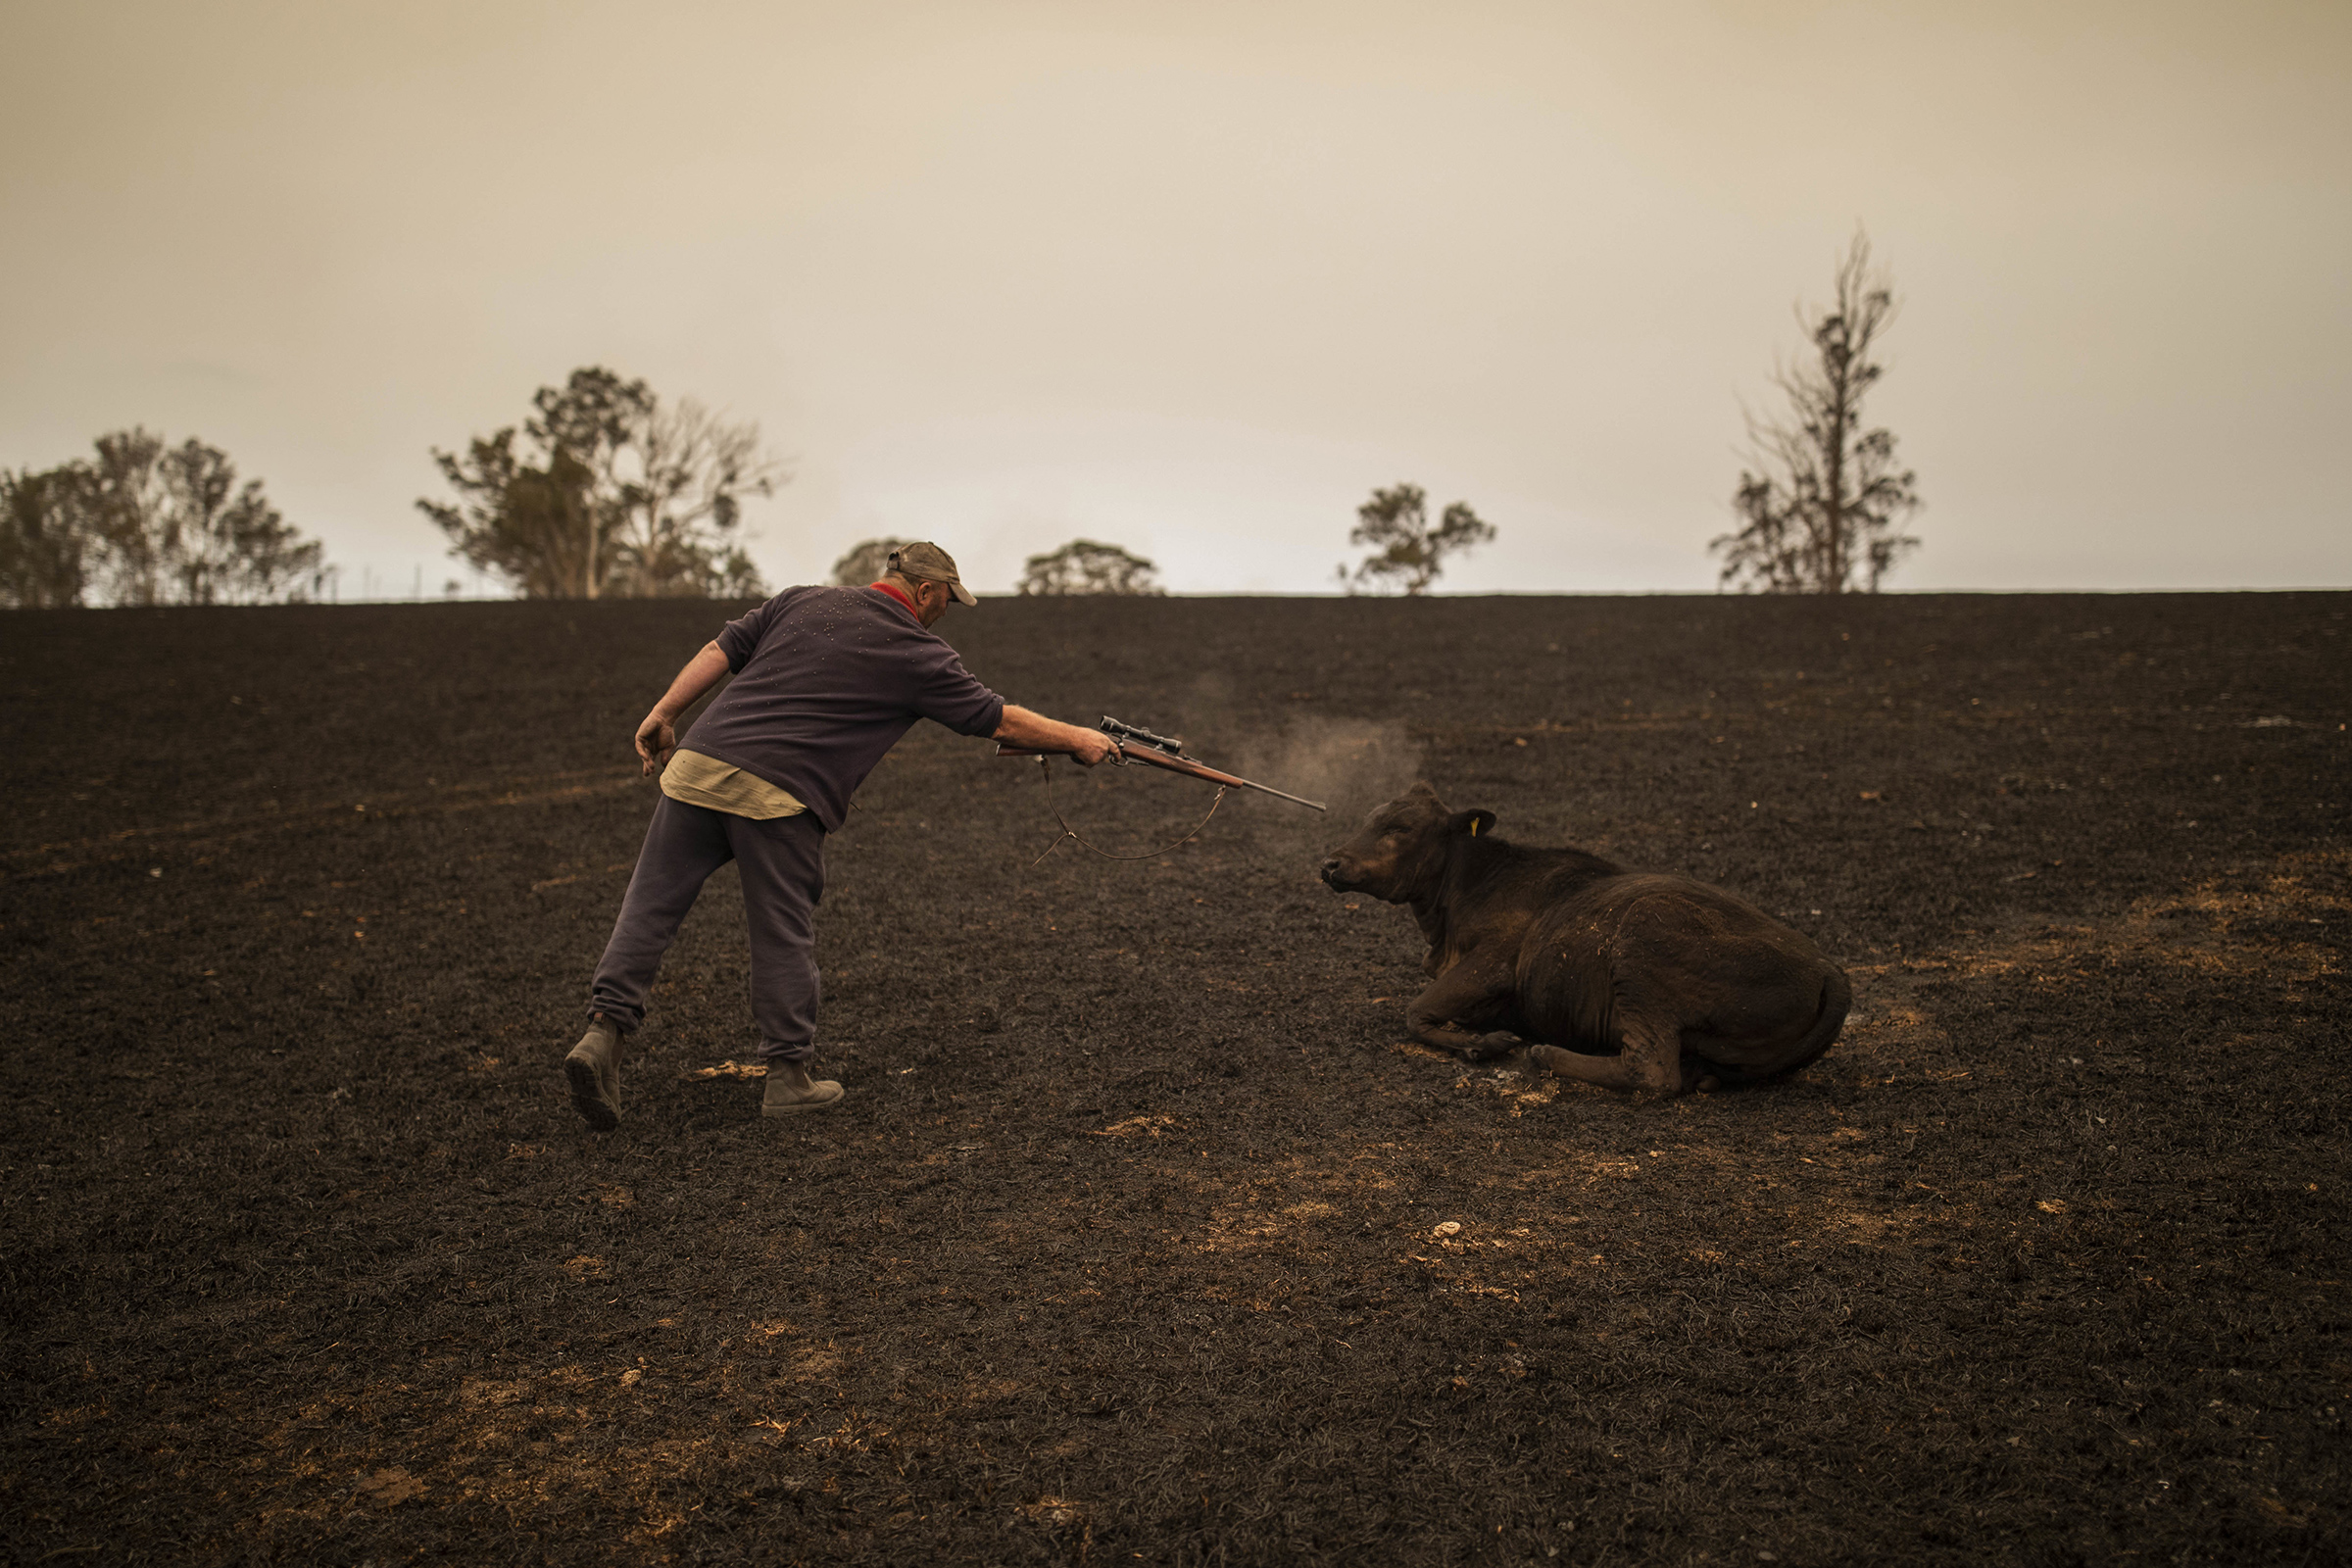 A resident puts down a cow that was severely wounded after a bushfire ravaged a paddock in Coolagolite, New South Wales, Australia, on Jan. 1. (Sean Davey—EPA-EFE/Shutterstock)